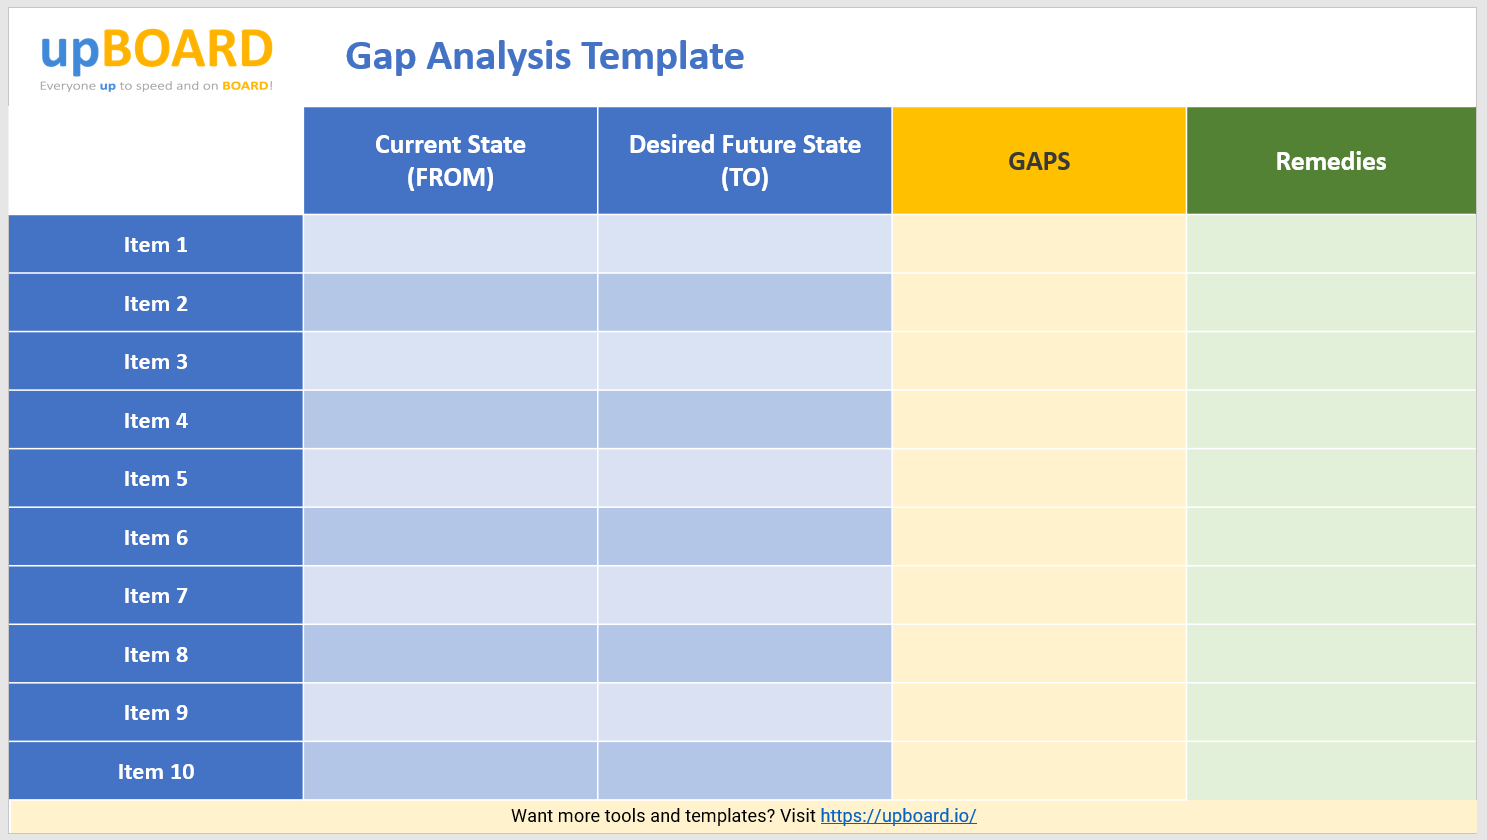 Gap Analysis Online Tools, Templates & Web Software Intended For Gap Analysis Report Template Free